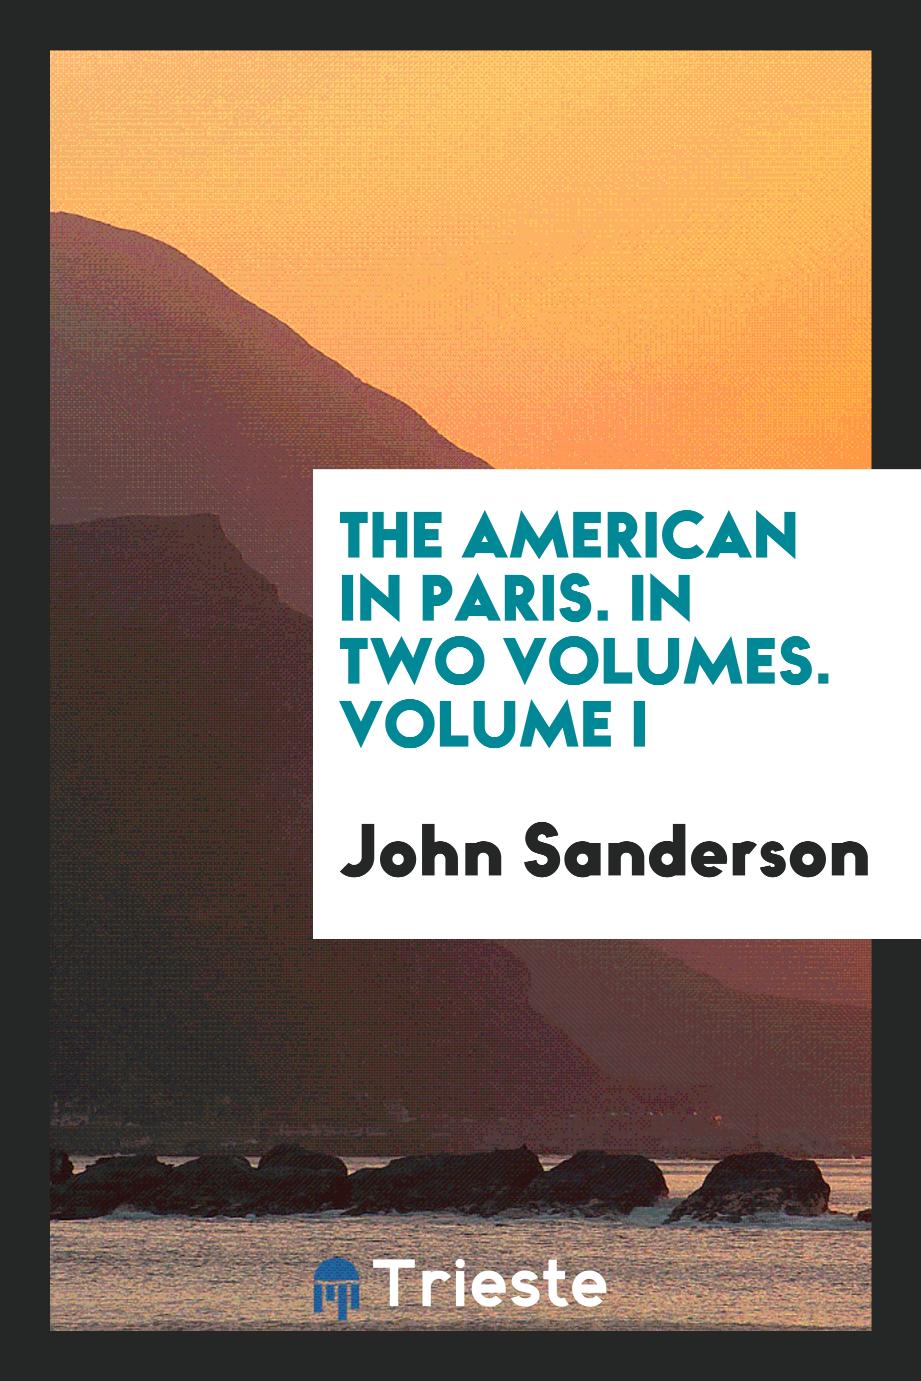 The American in Paris. In two volumes. Volume I